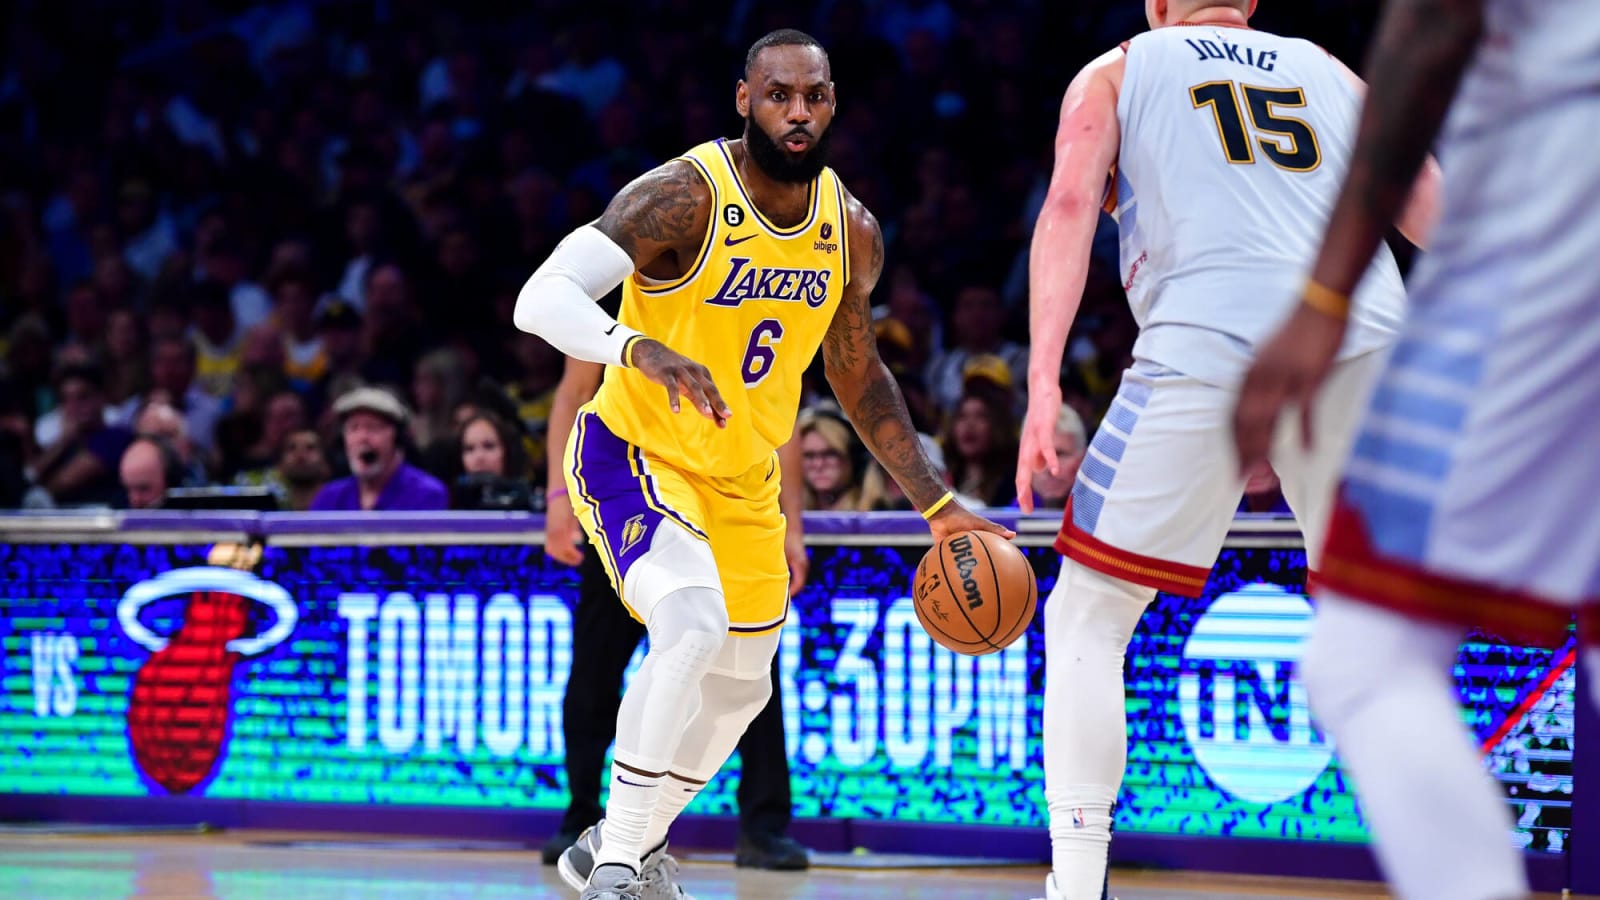 Lakers Will Retire LeBron James' Jersey